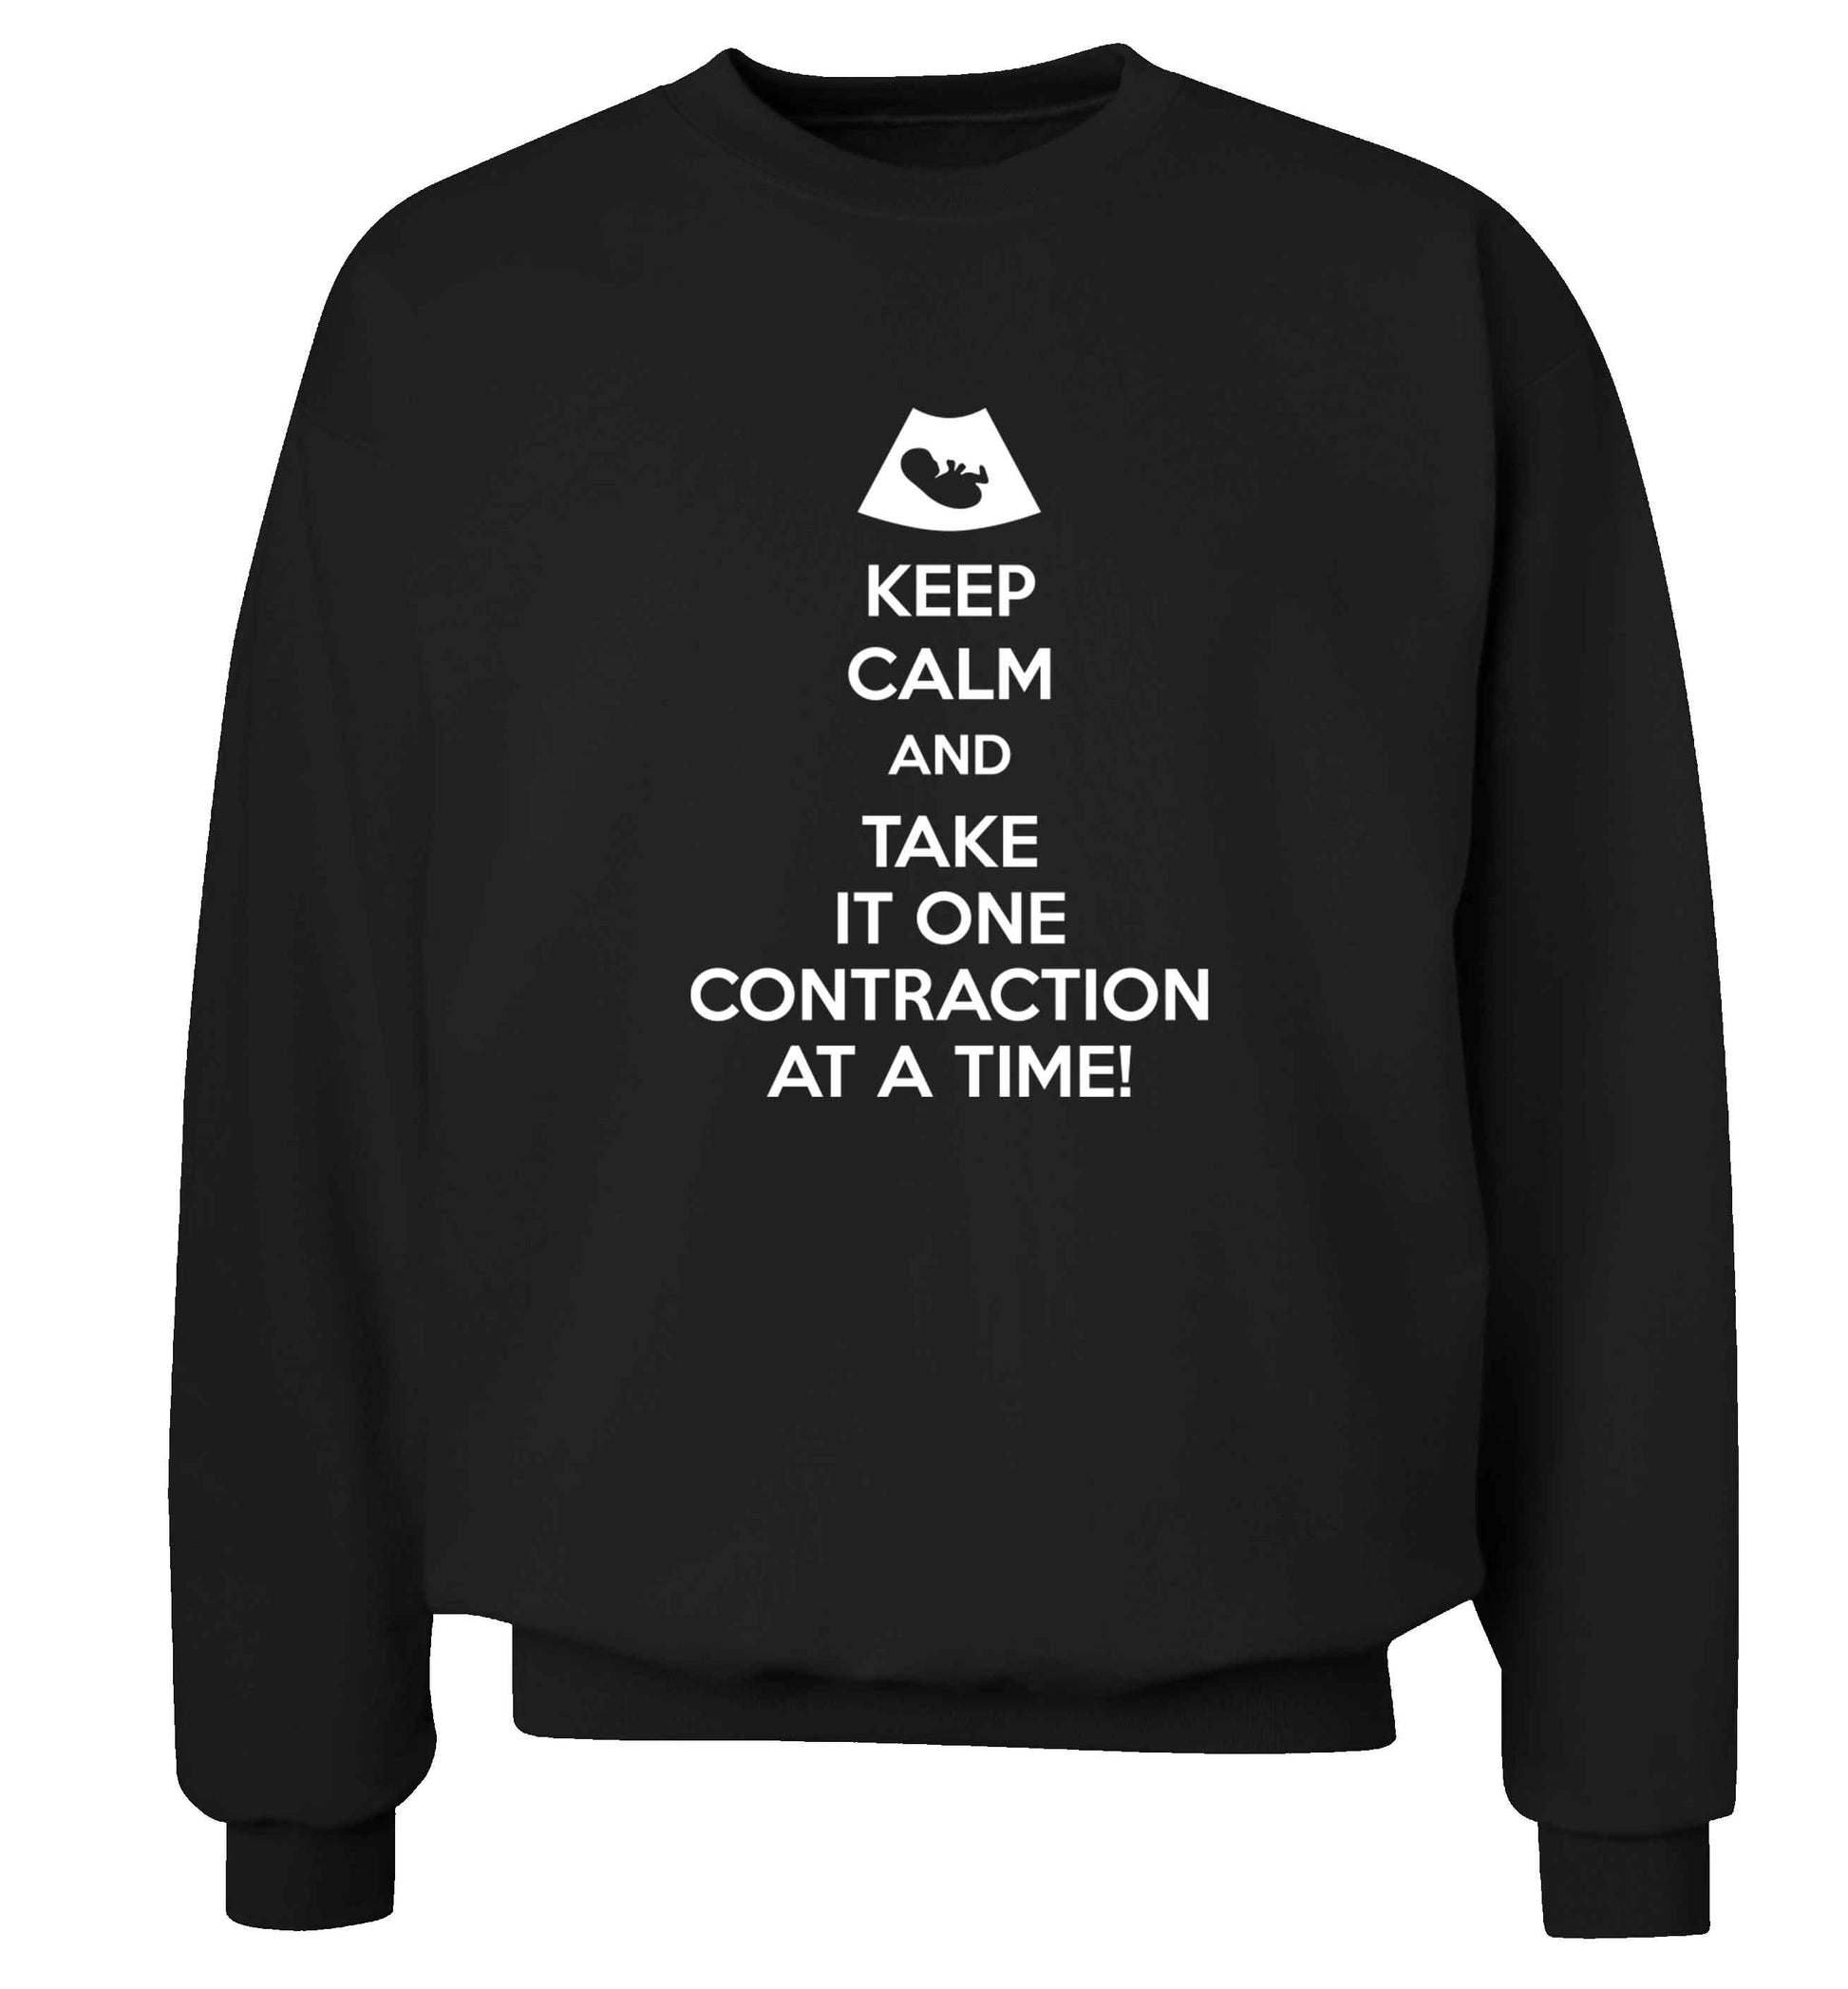 Keep calm and take it one contraction at a time Adult's unisex black Sweater 2XL